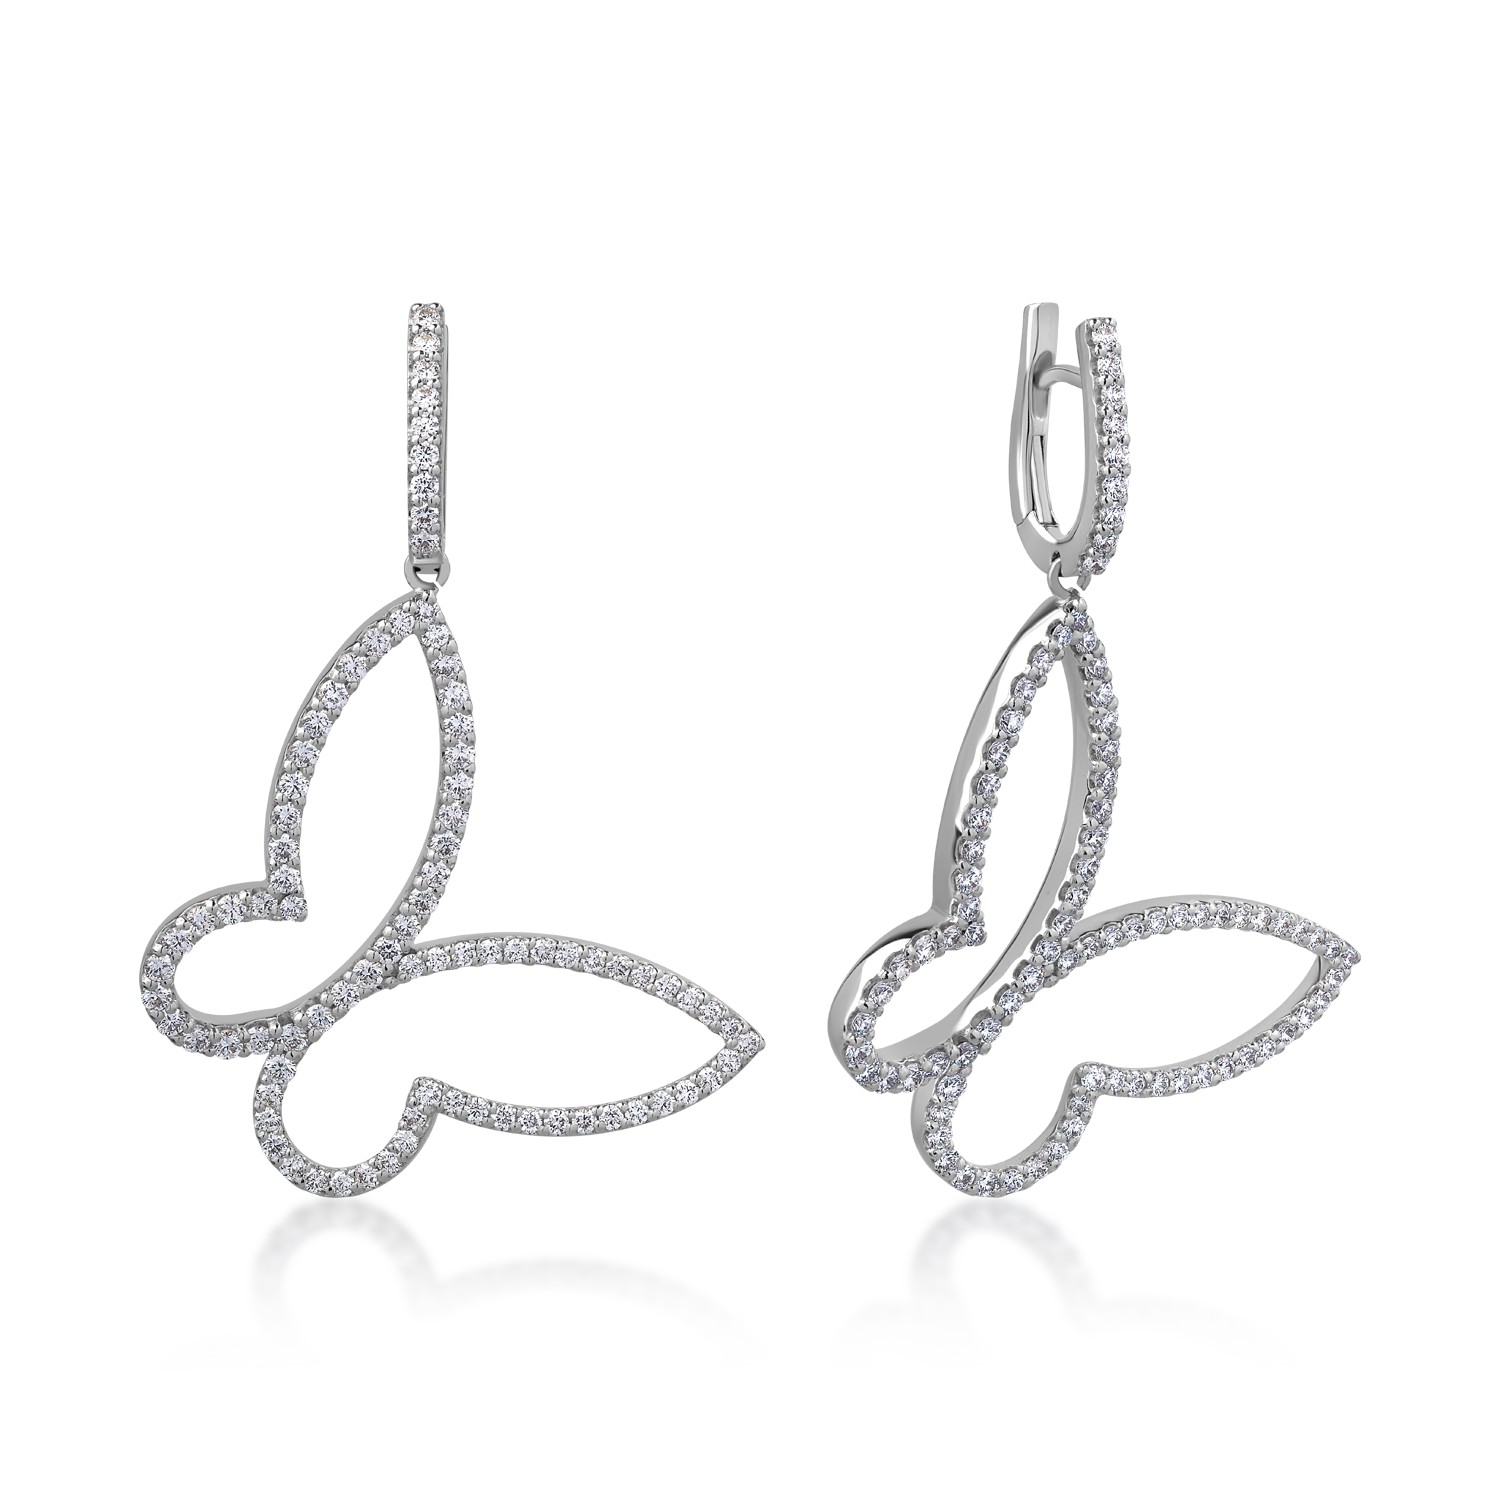 18K white gold earrings with 2.1ct diamonds